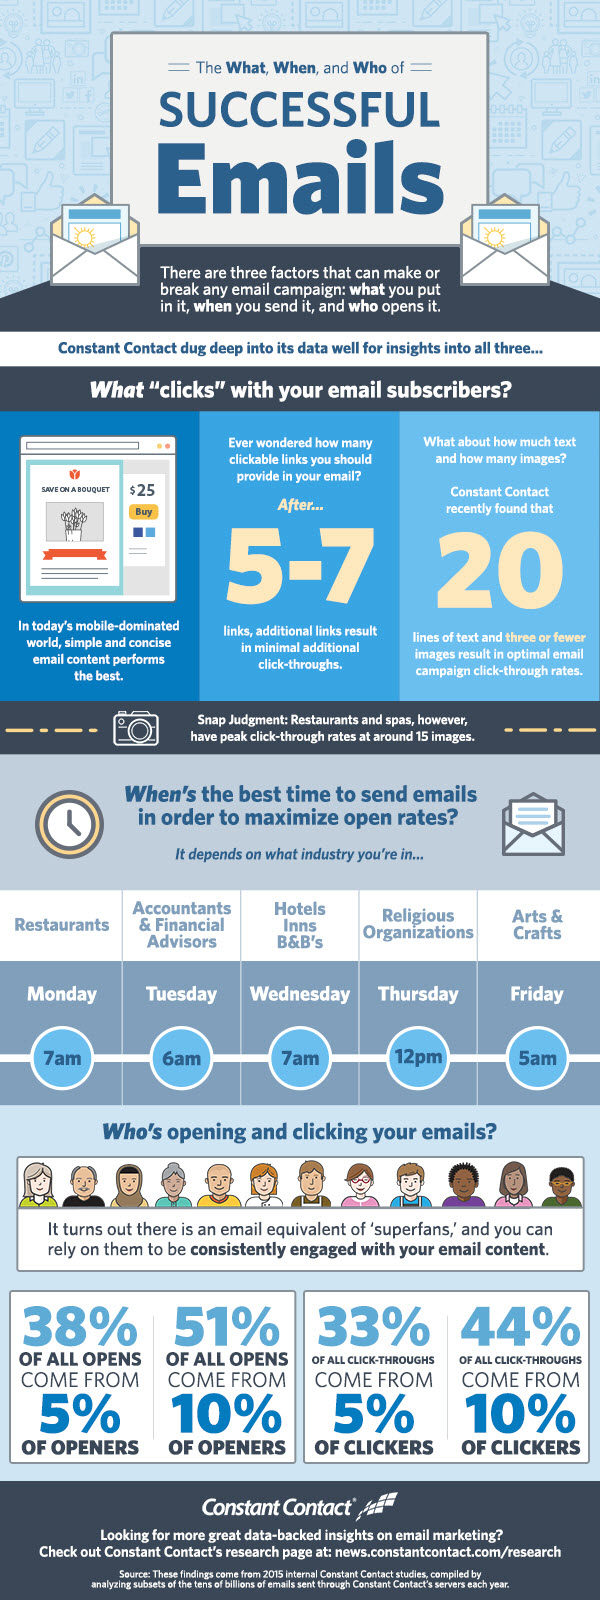 Email_Infographic_600x1600_Edit3